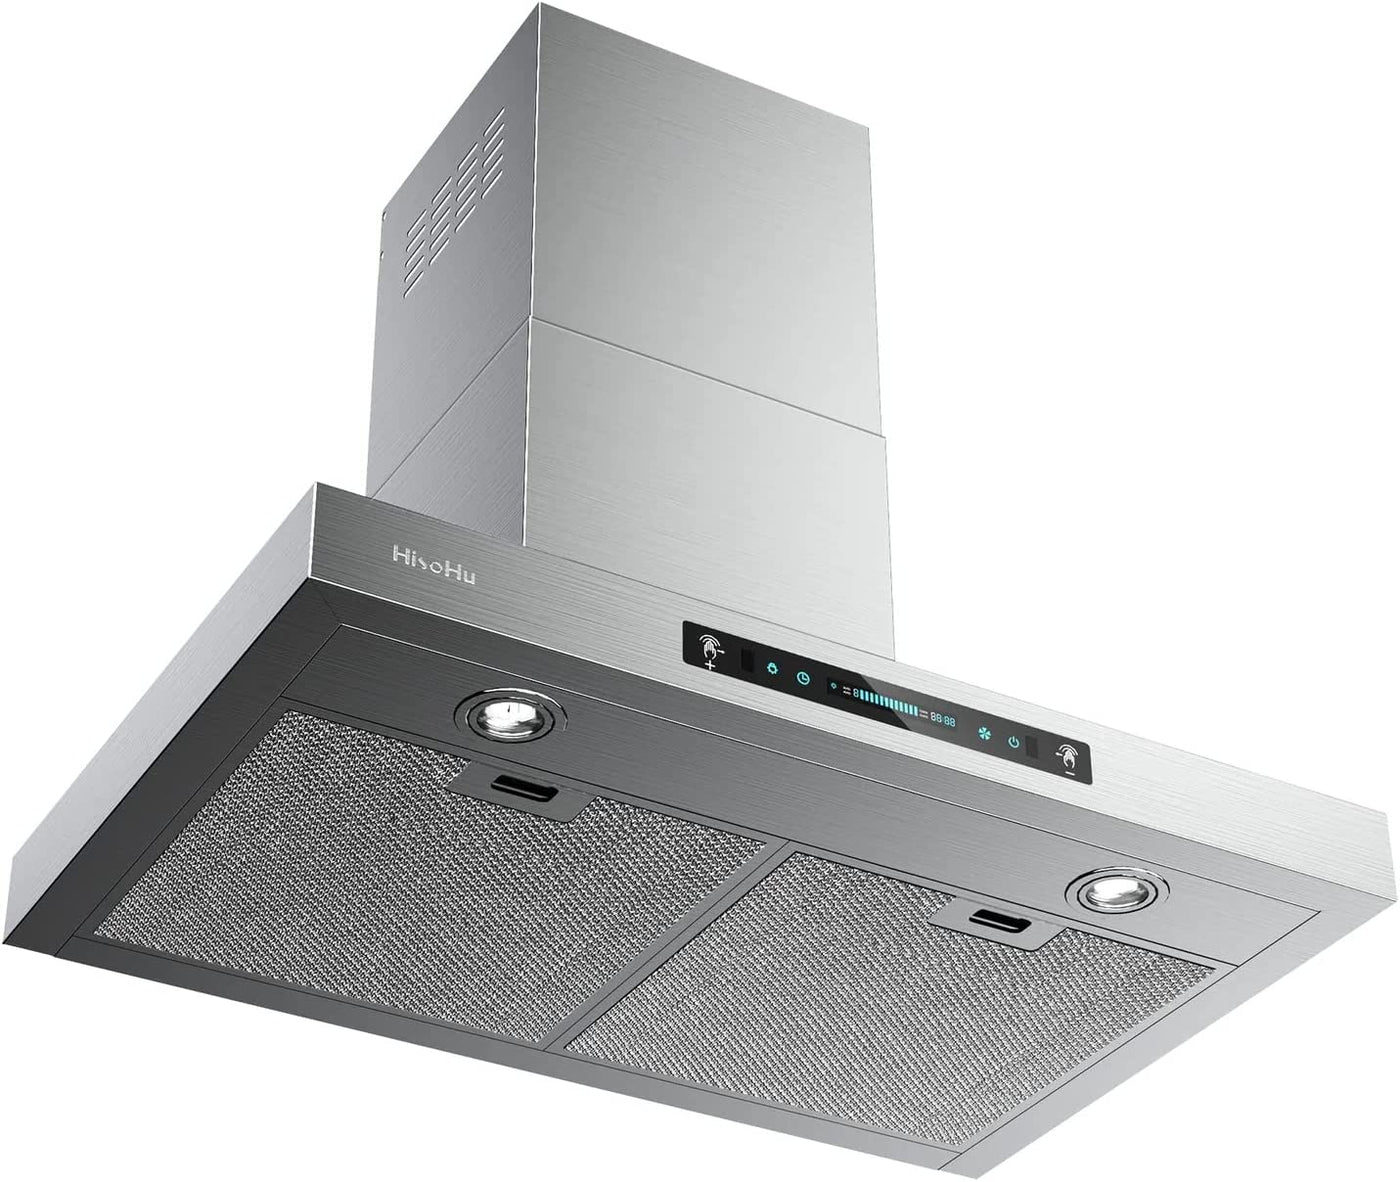 HisoHu Wall Mount Range Hood, 36 Inch 780 CFM Stainless Steel Kitchen Chimney Vent (A01-36") - $240